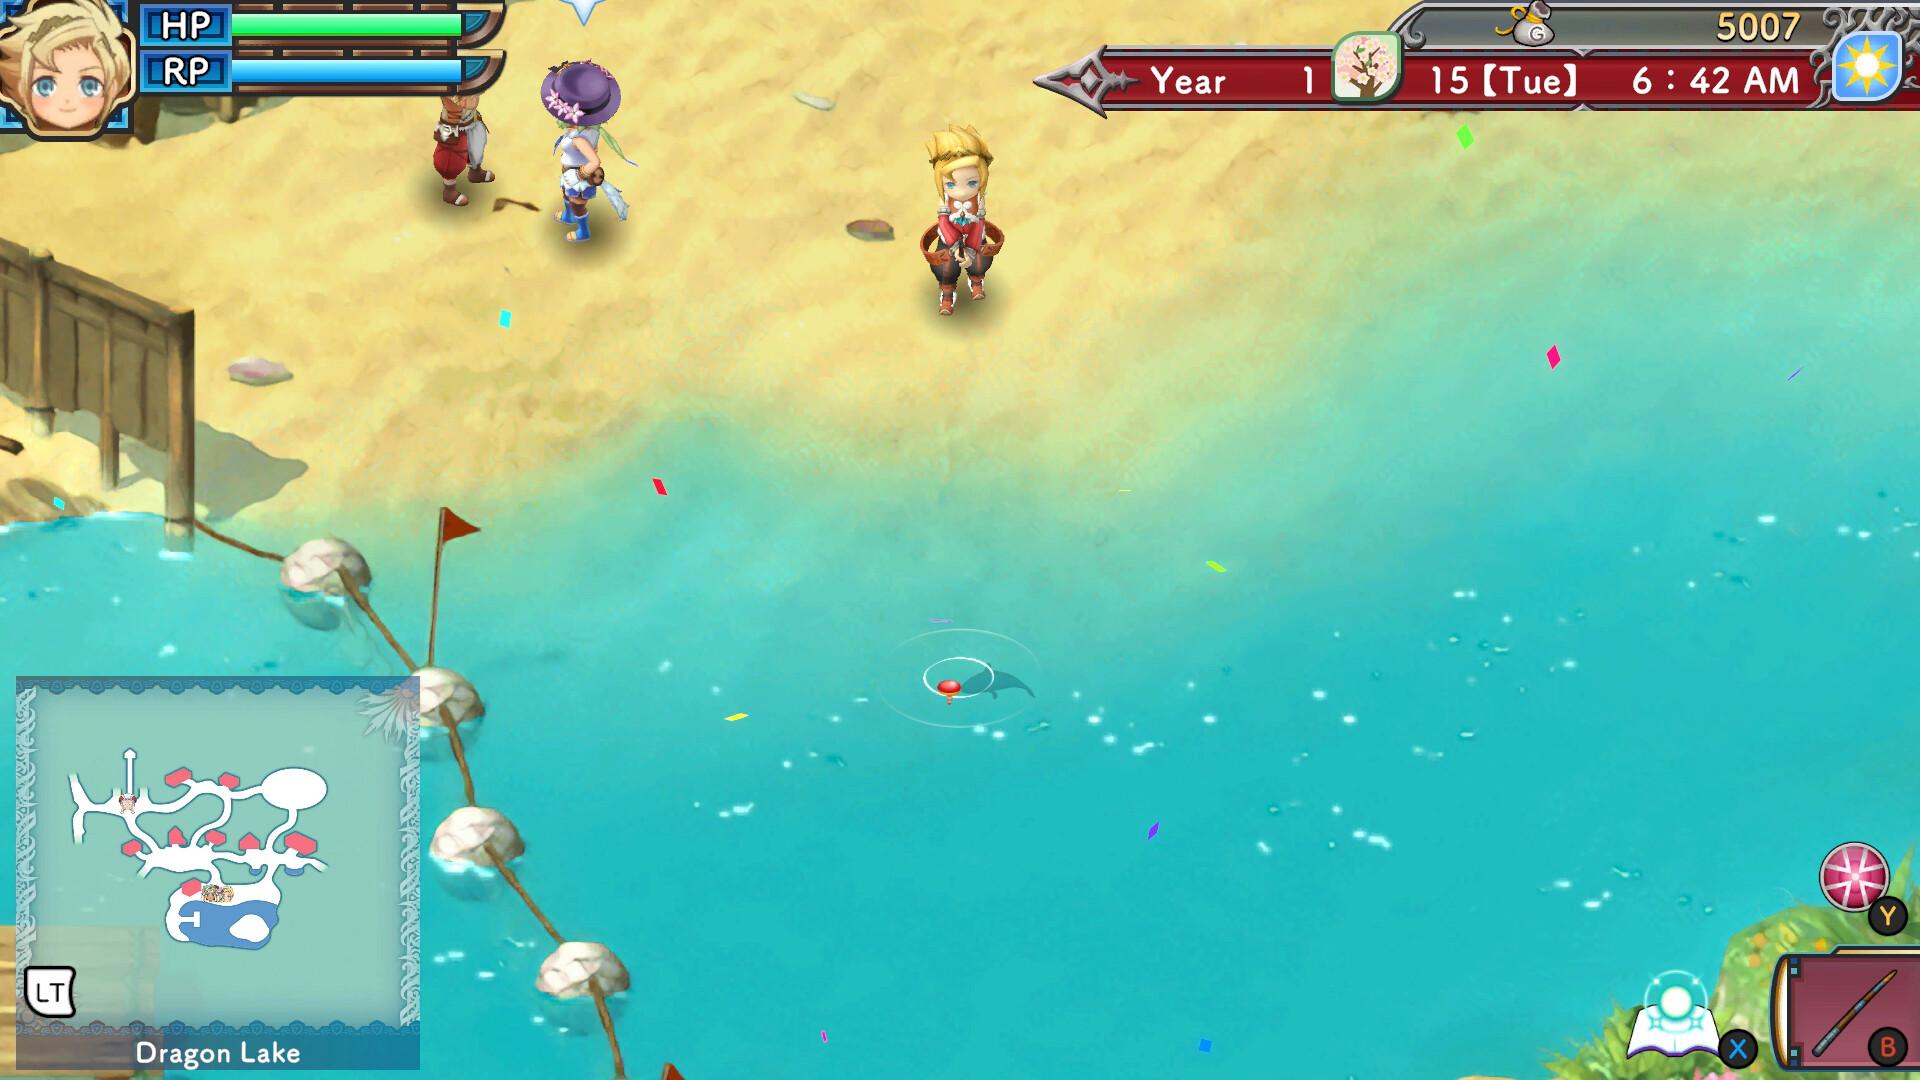 Screenshot №10 from game Rune Factory 3 Special